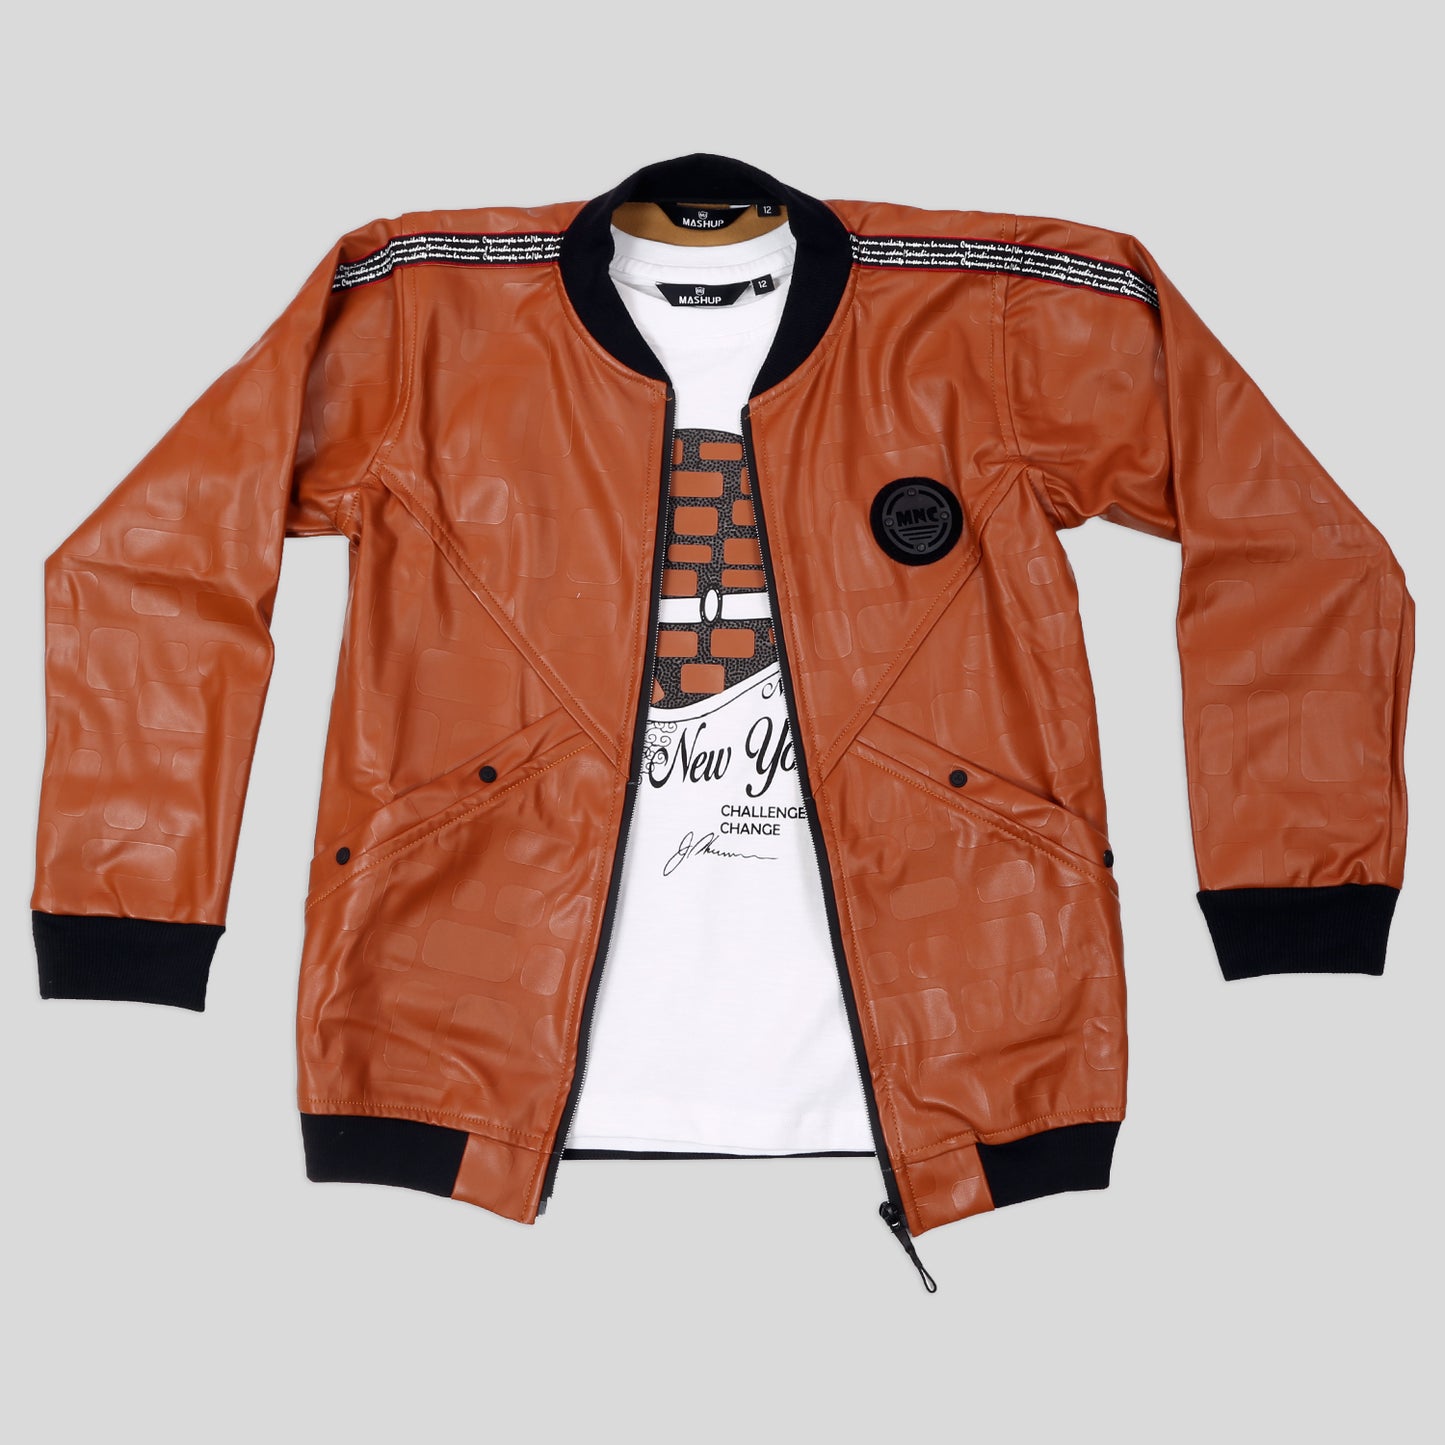 Superior PU leather jacket + matching T-shirt for the racer Boy.